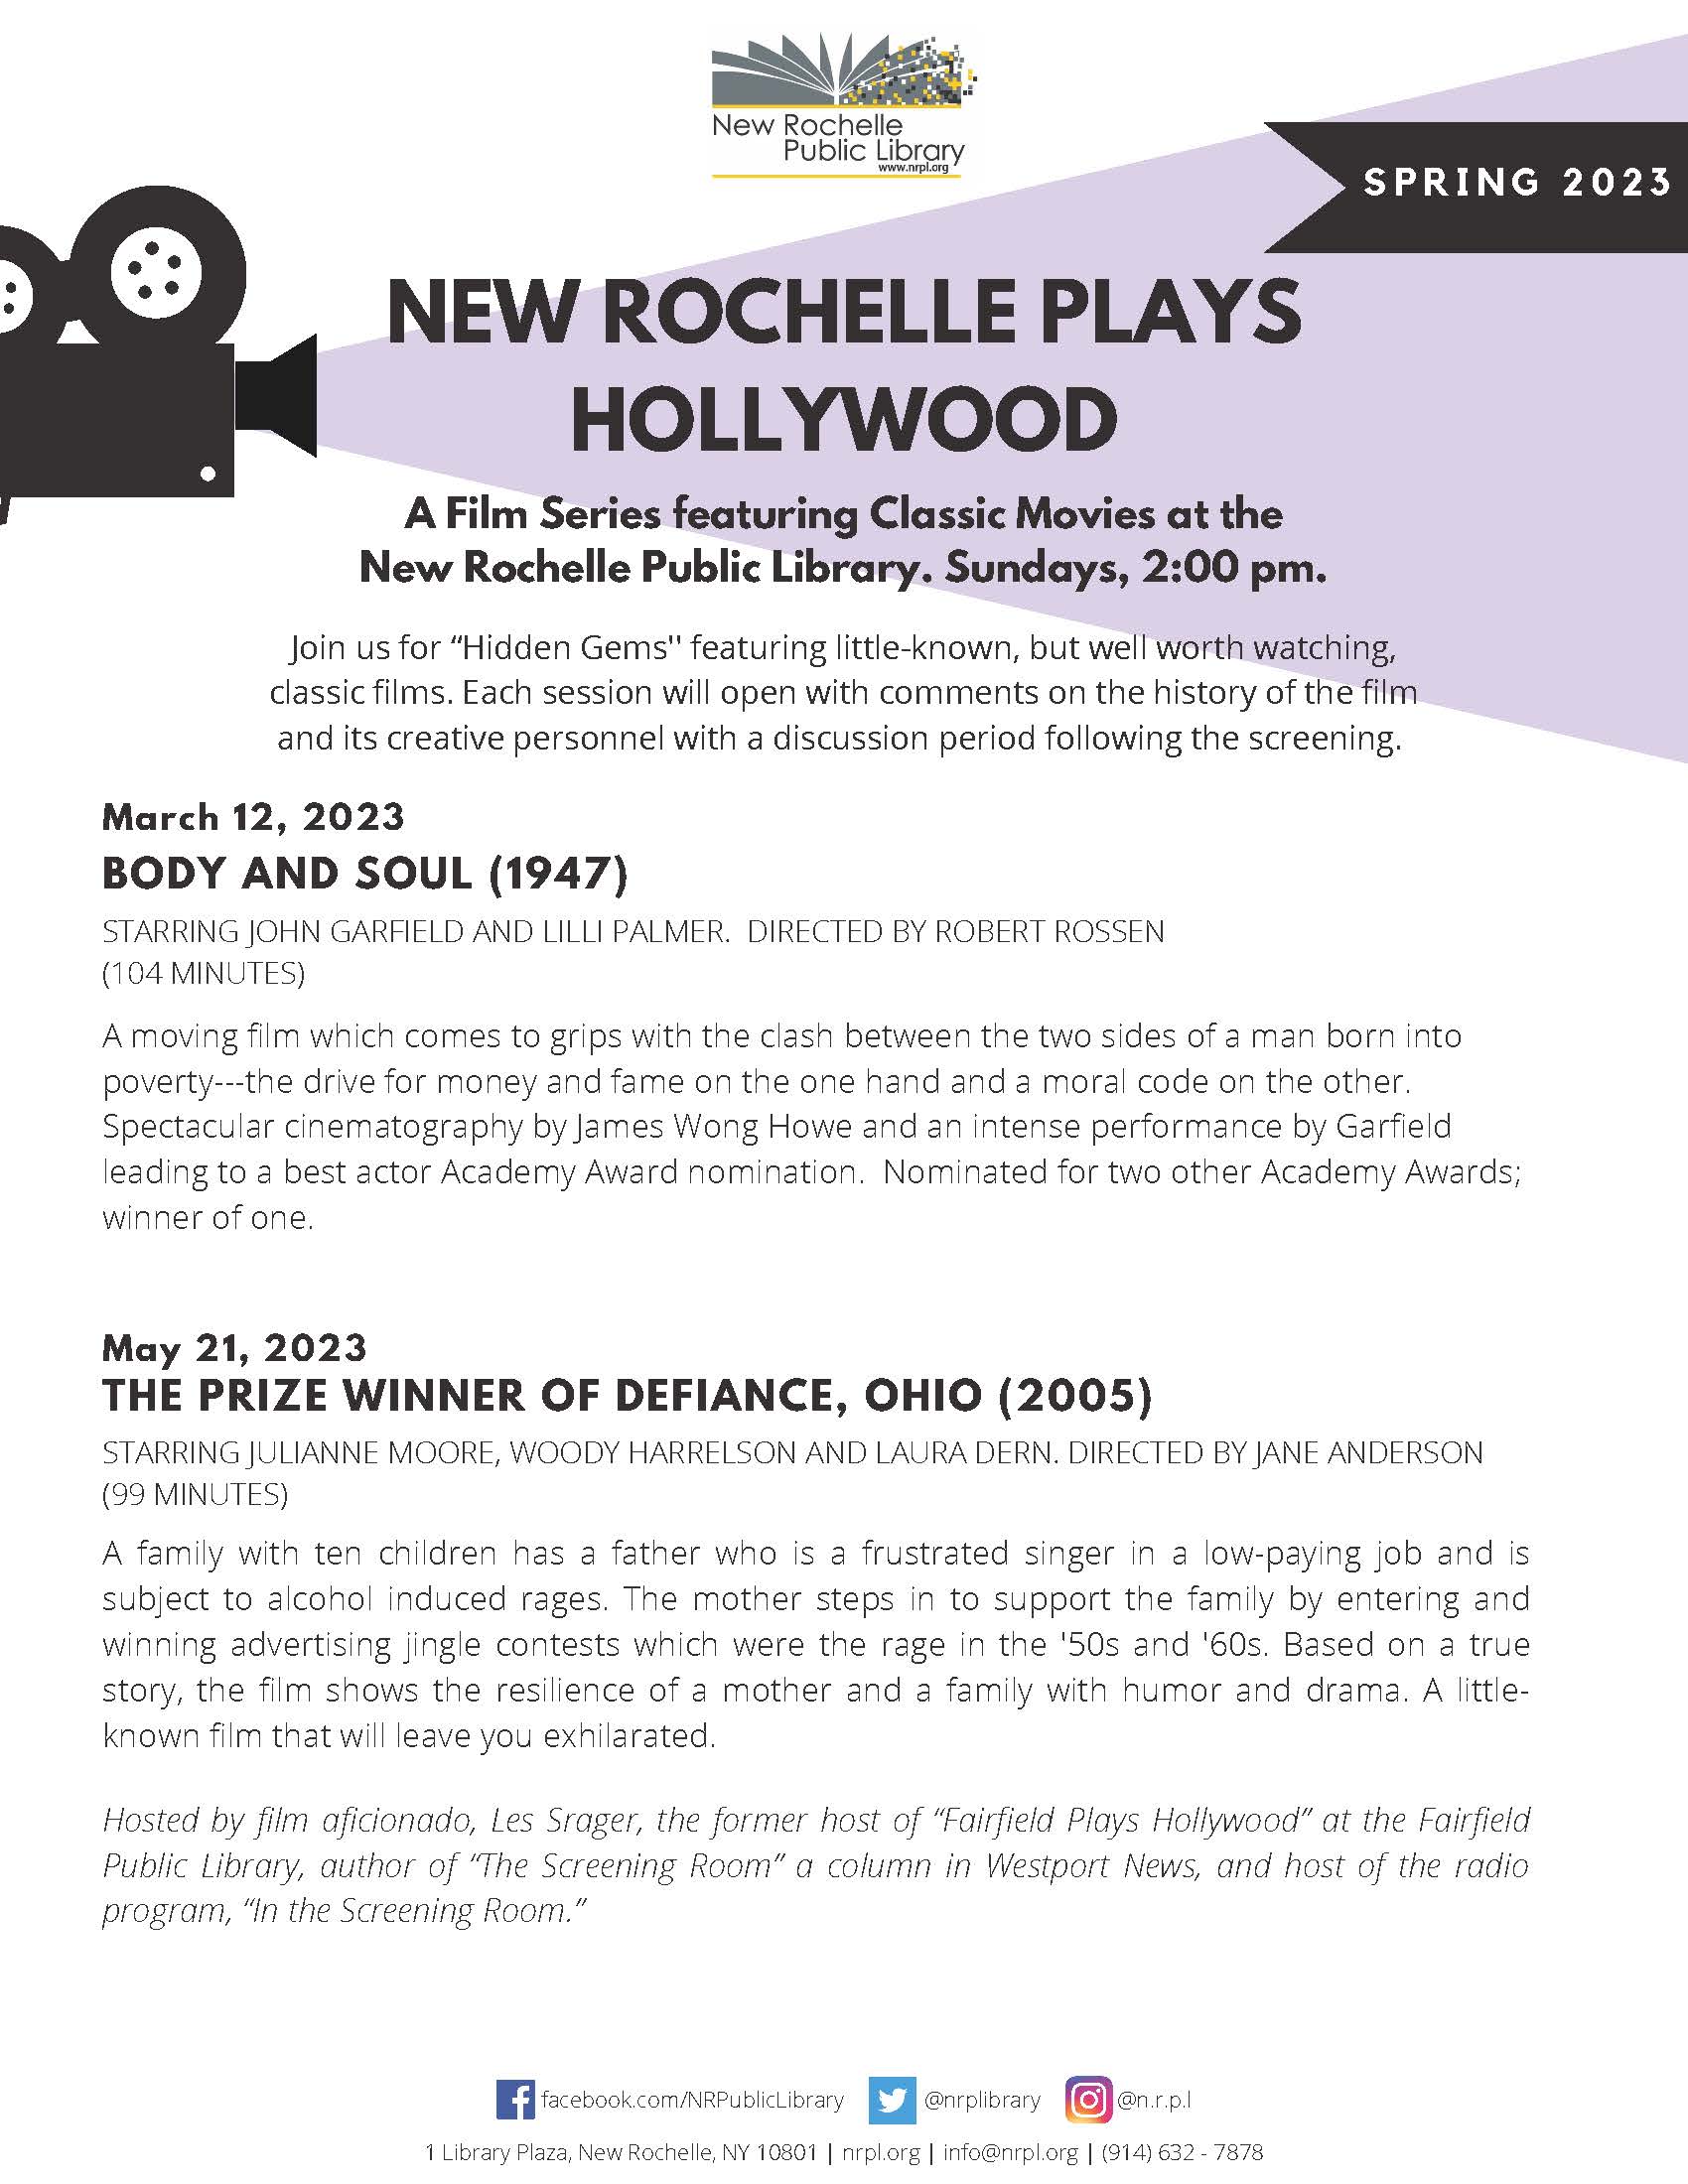 New Rochelle Plays Hollywood "Body and Soul" (1947) New Rochelle